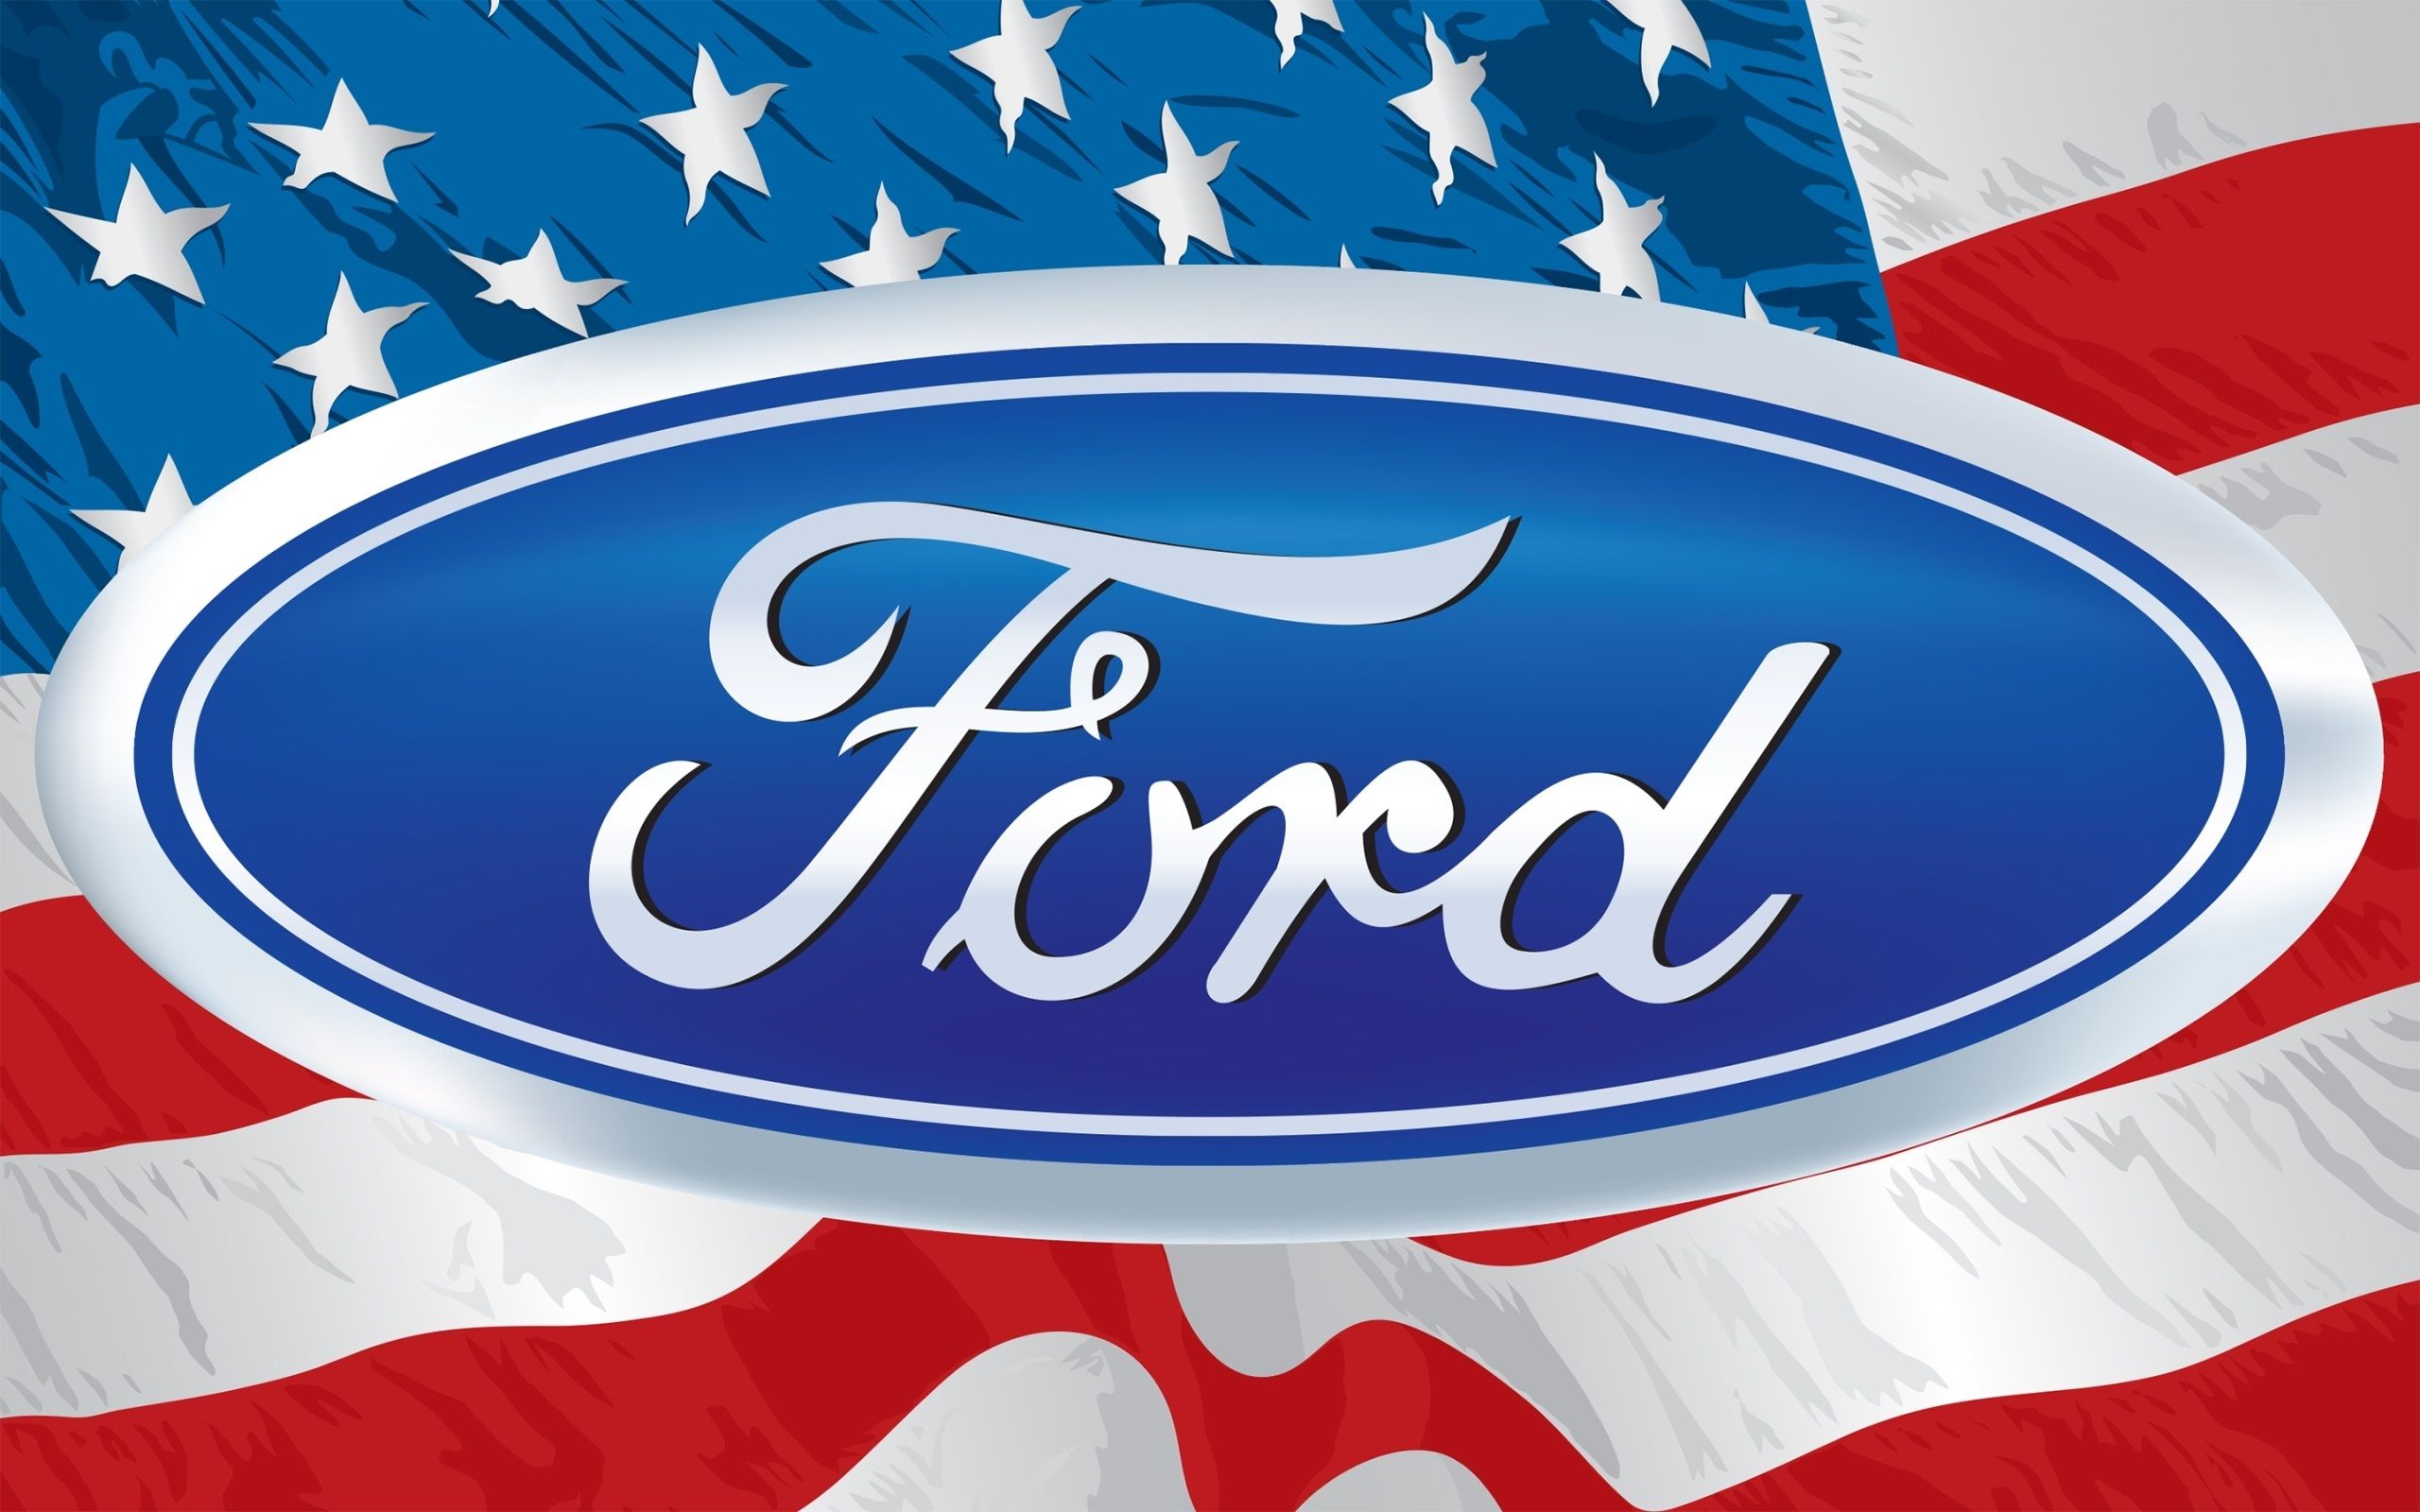 Wallpapers of the international car brand Ford, Ford is really